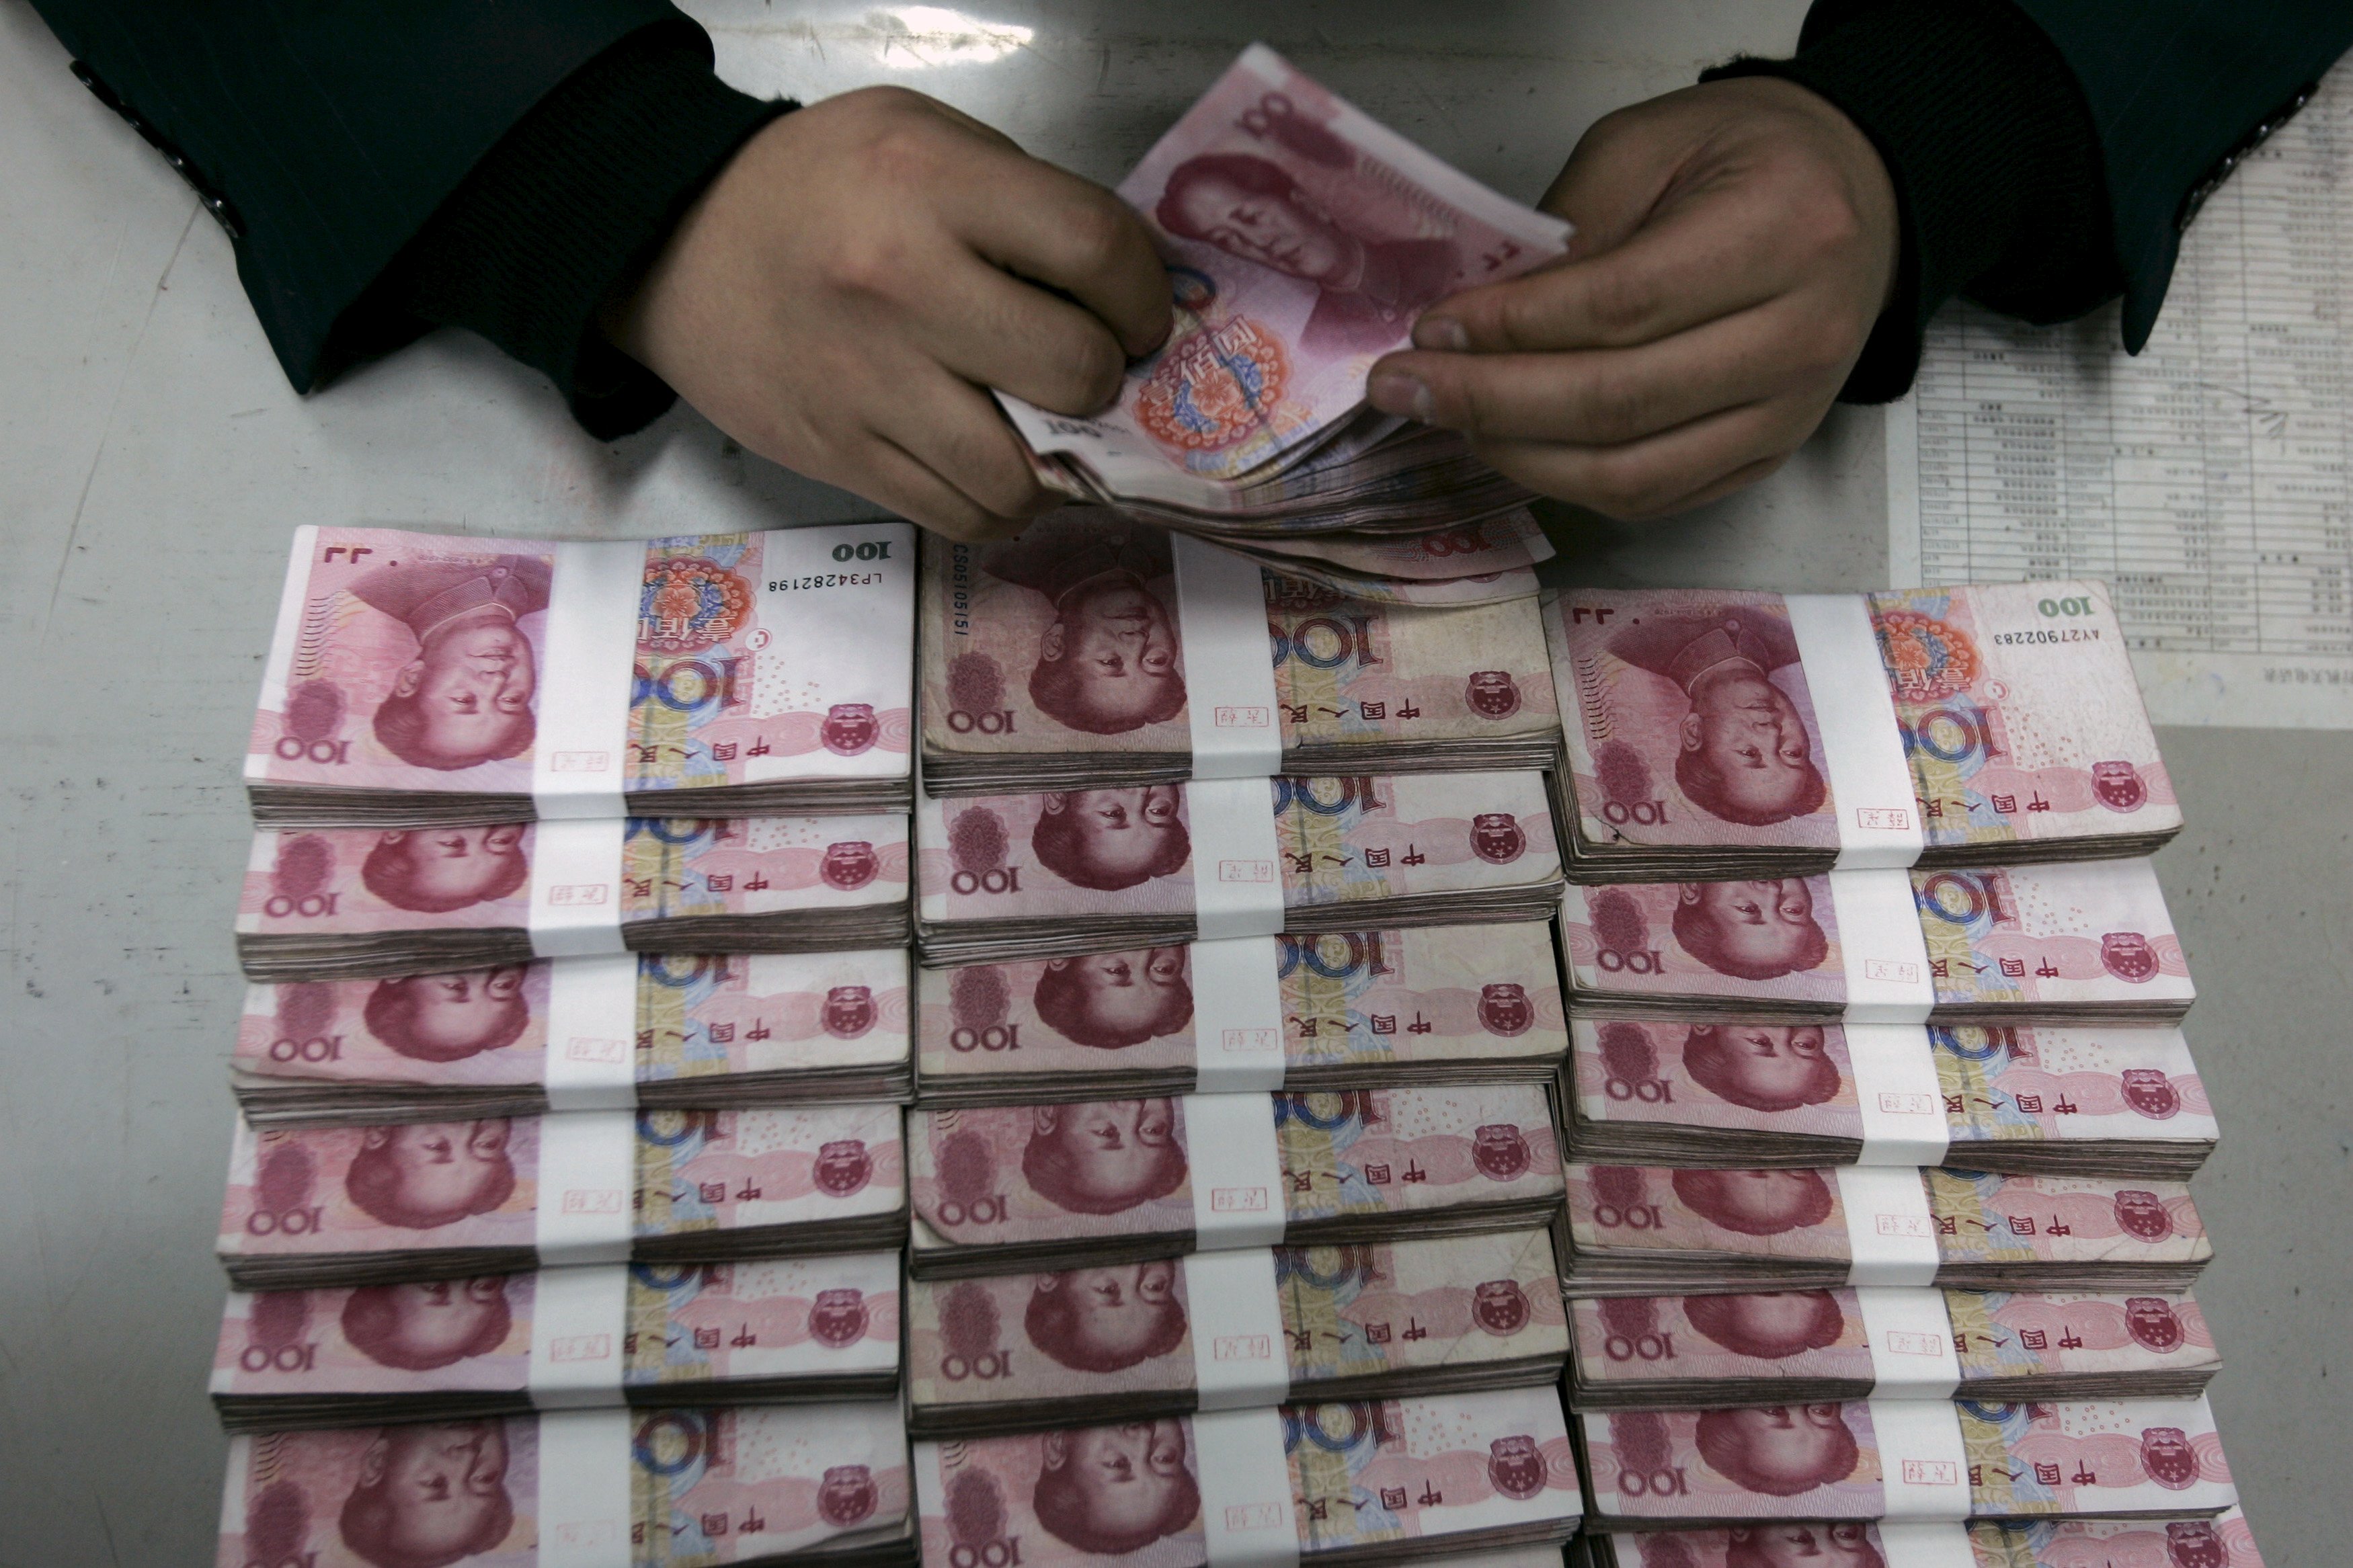 An employee counts yuan banknotes at a branch of Bank of China in Taiyuan, Shanxi province in this February 10, 2010 file photo. REUTERS/Stringer/Files CHINA OUT. NO COMMERCIAL OR EDITORIAL SALES IN CHINA